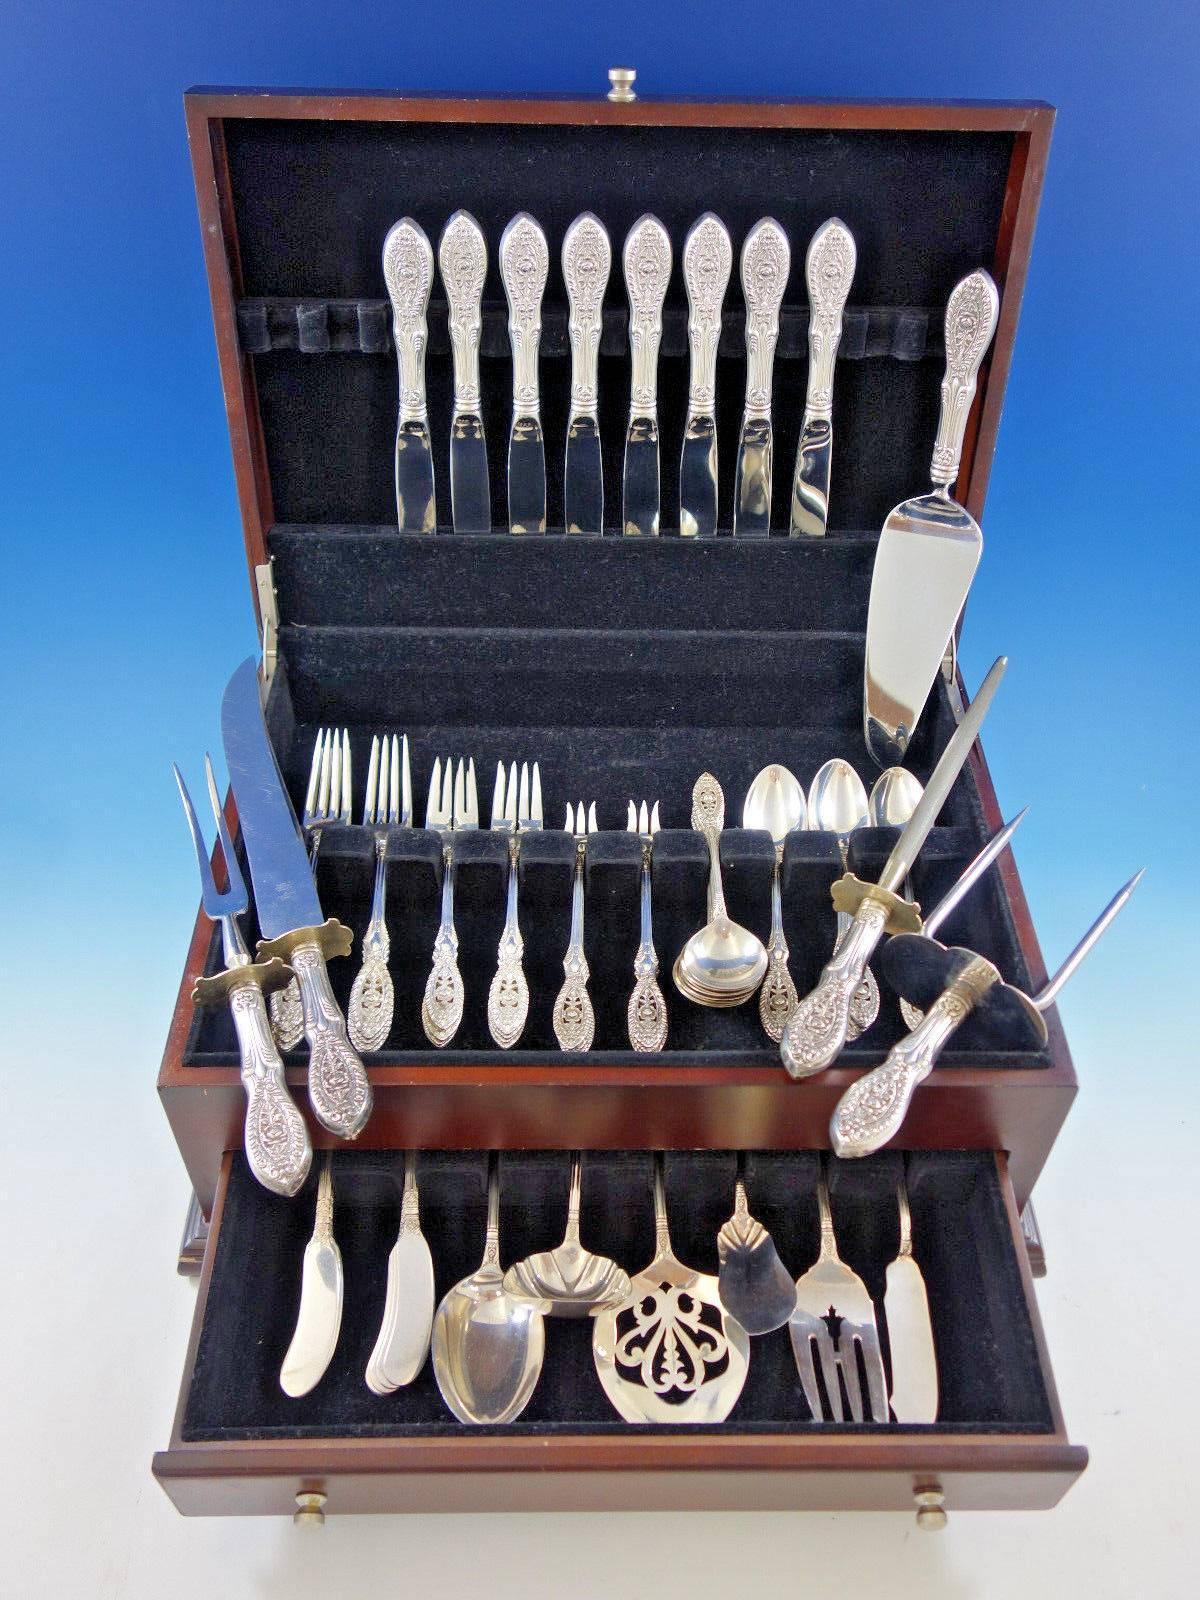 Valenciennes by Manchester pierced handle sterling silver Flatware set, 67 Pieces. This set includes: This set includes: Eight knives, 8 5/8